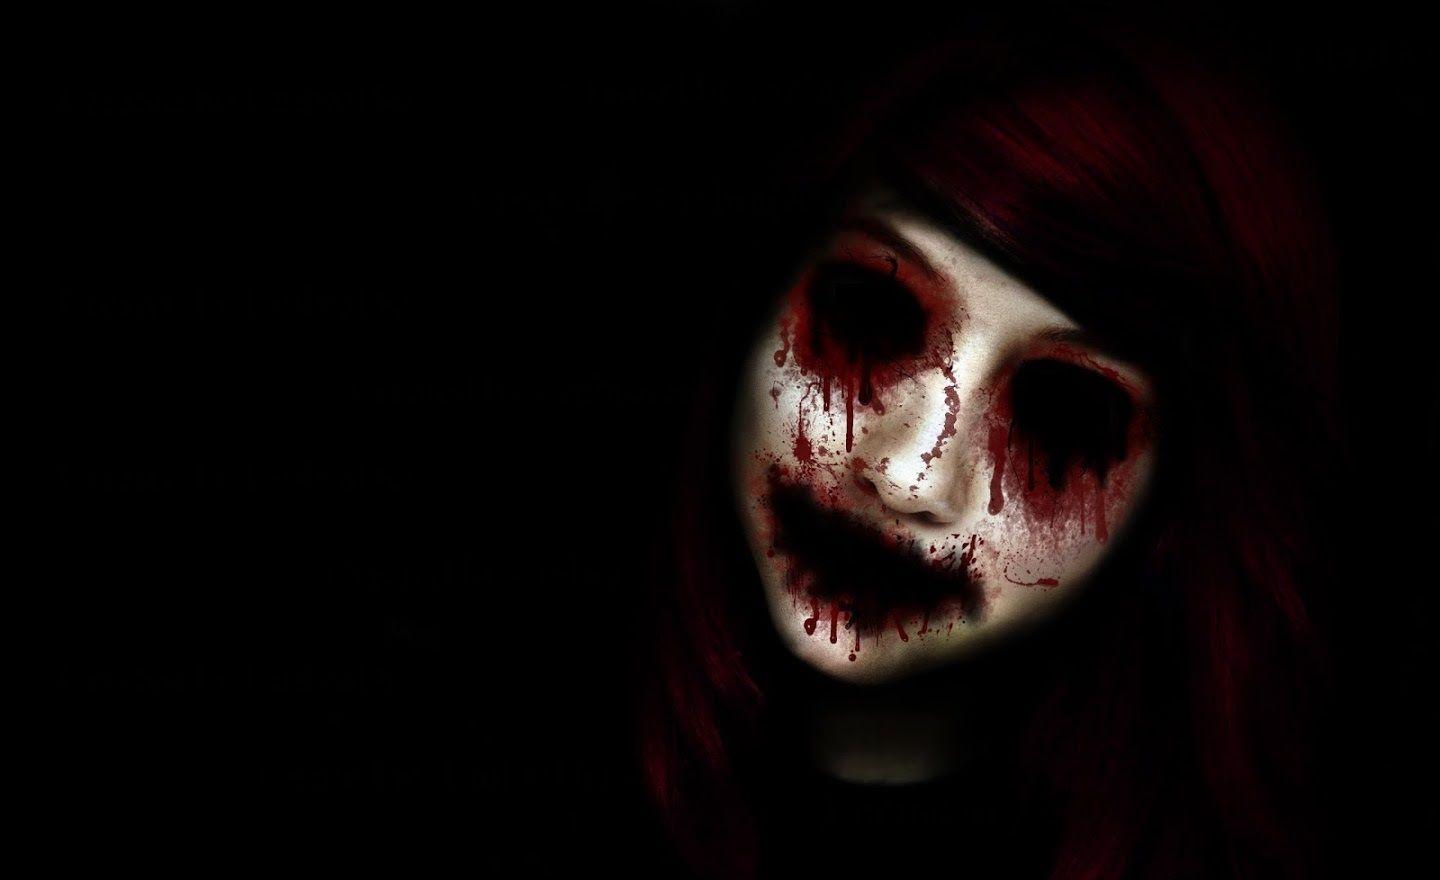 Scary Desktop HD Wallpaper Wallpaper Background of Your Choice